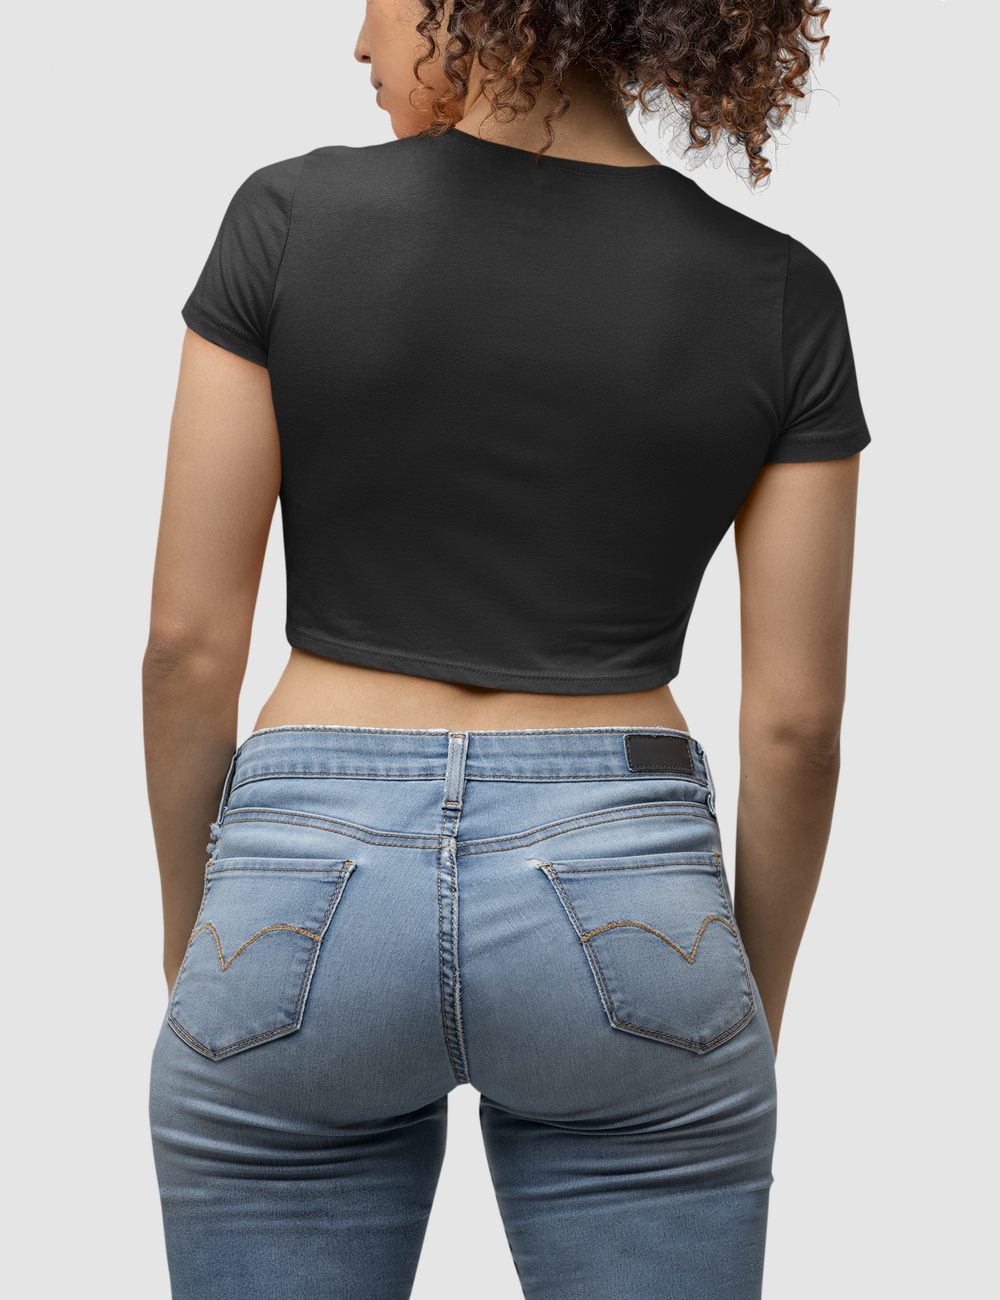 Netflix And Chill Women's Fitted Crop Top T-Shirt OniTakai